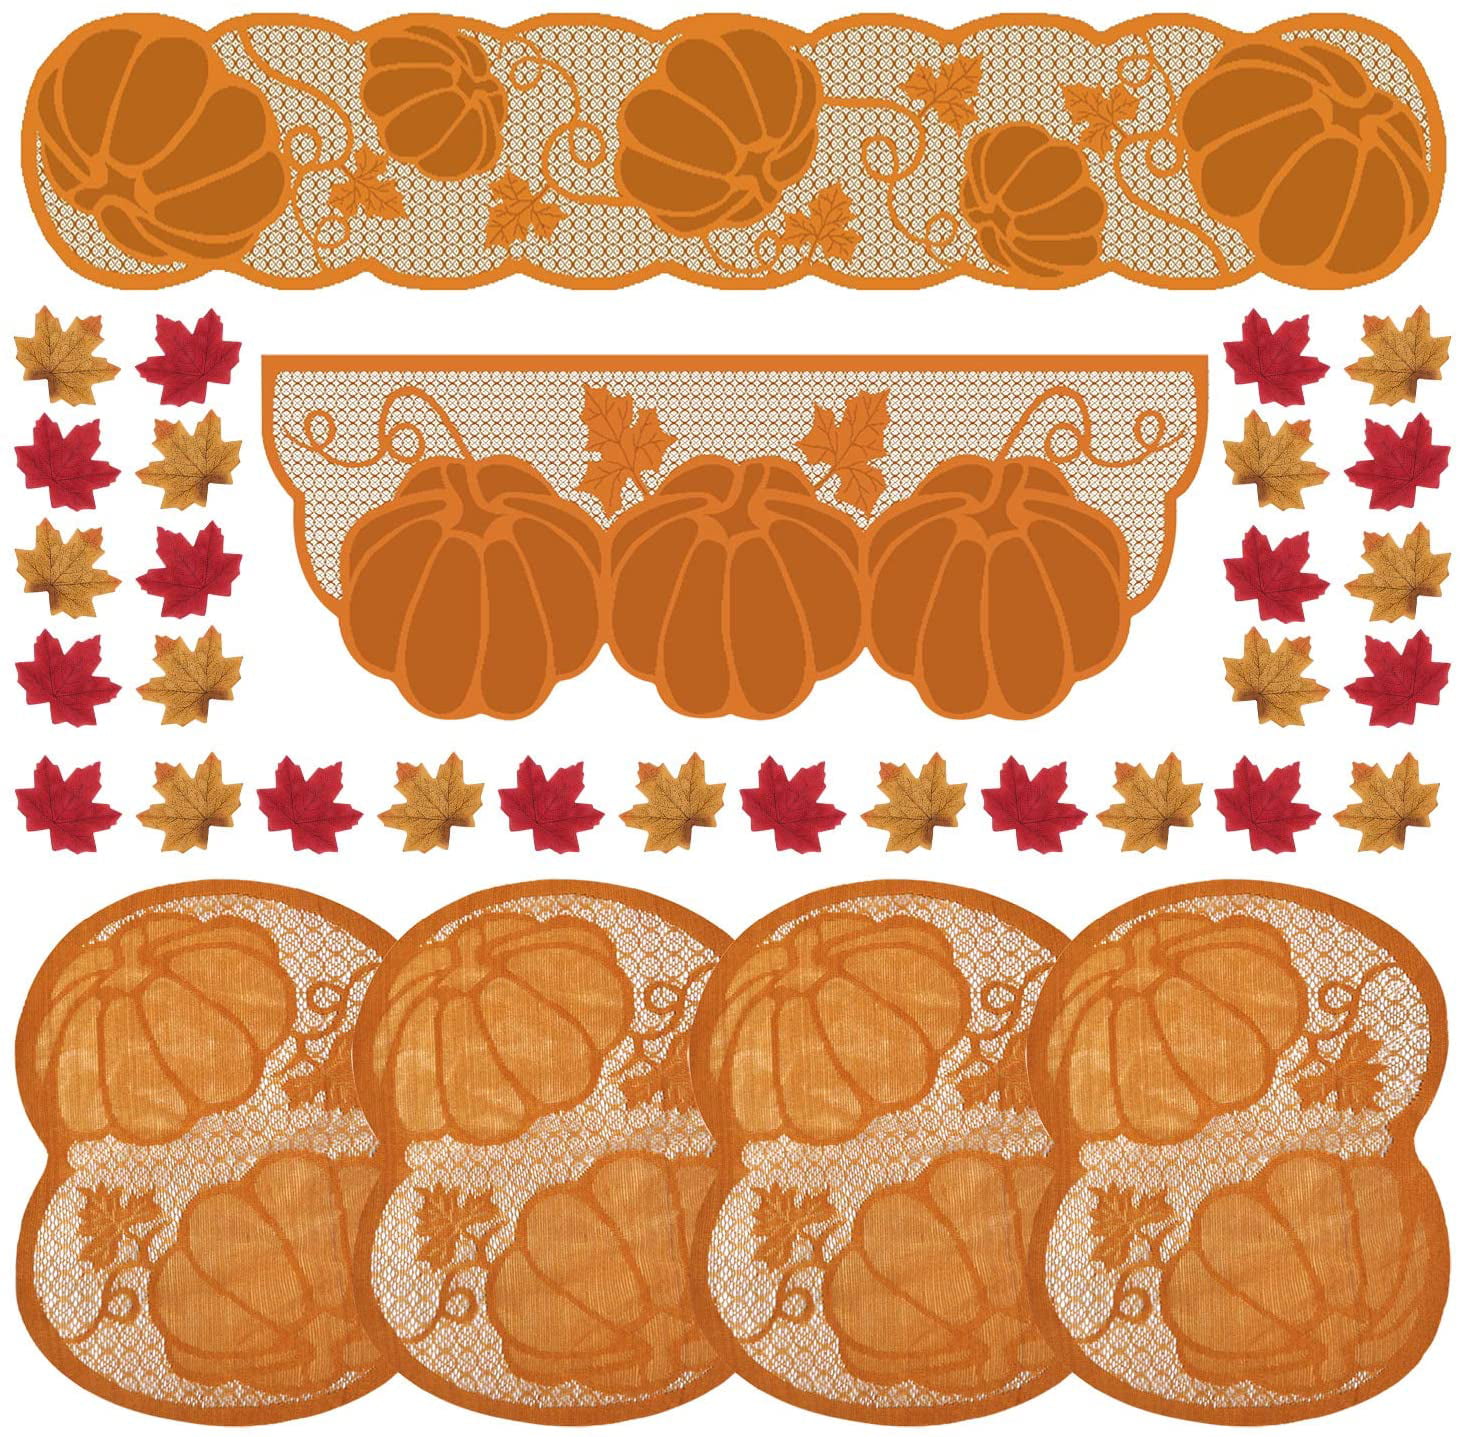 Lace Pumpkin Maple Leaves Fireplace Mantle Scarf Table Runner with Table Placemats and Artificial Maple Leaves for Fall Harvest Decor Thanksgiving Party FEPITO 106 Pcs Thanksgiving Decorations Set 